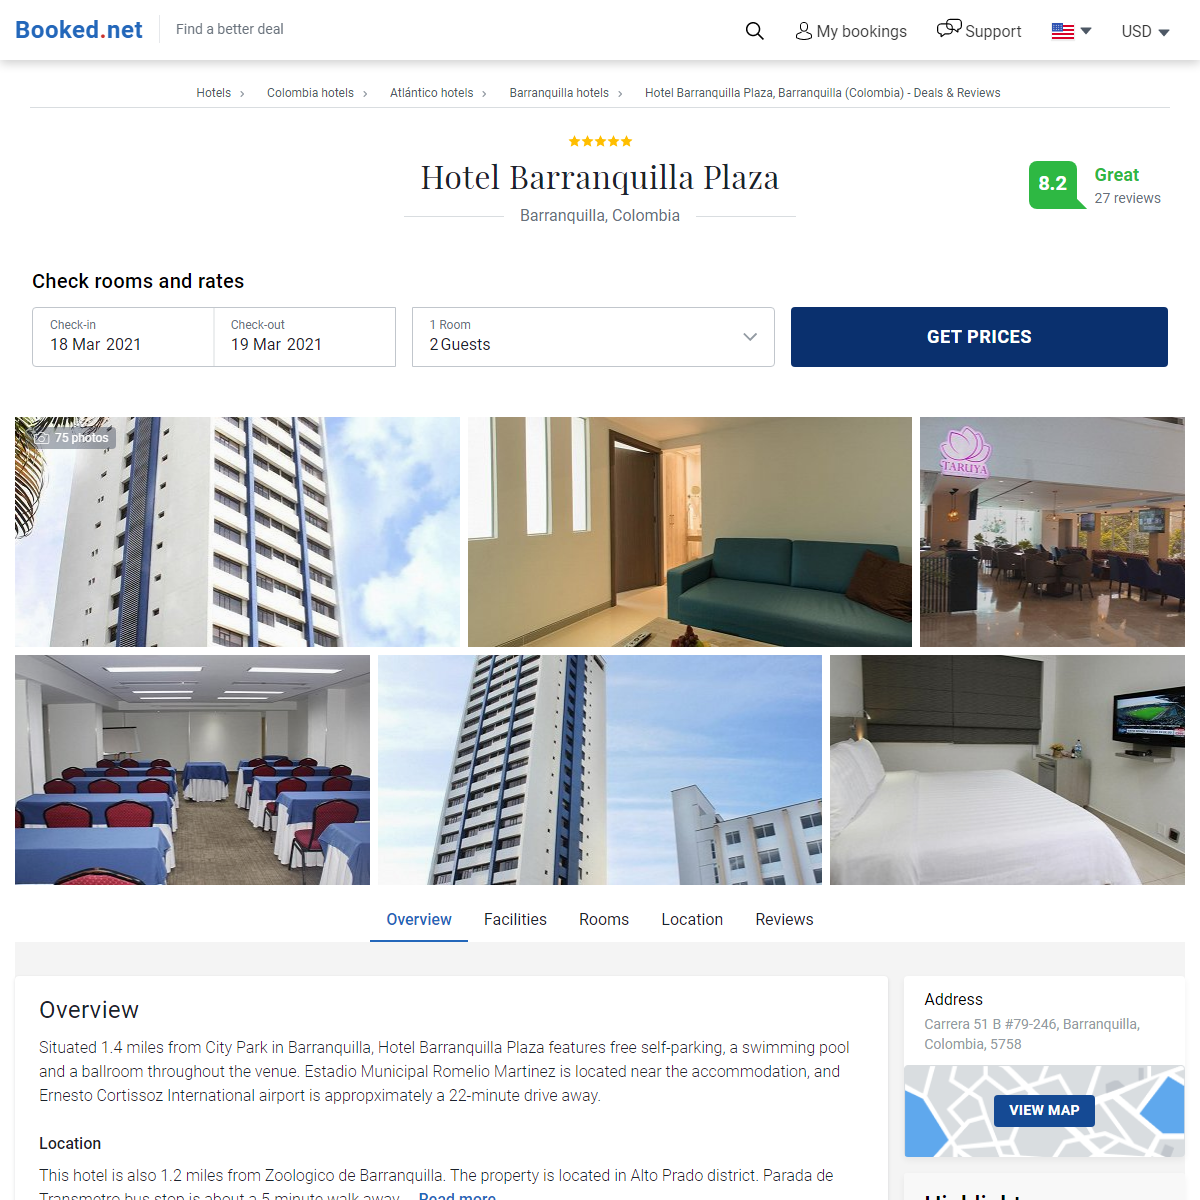 A complete backup of https://plaza-hotel-barranquilla.booked.net/